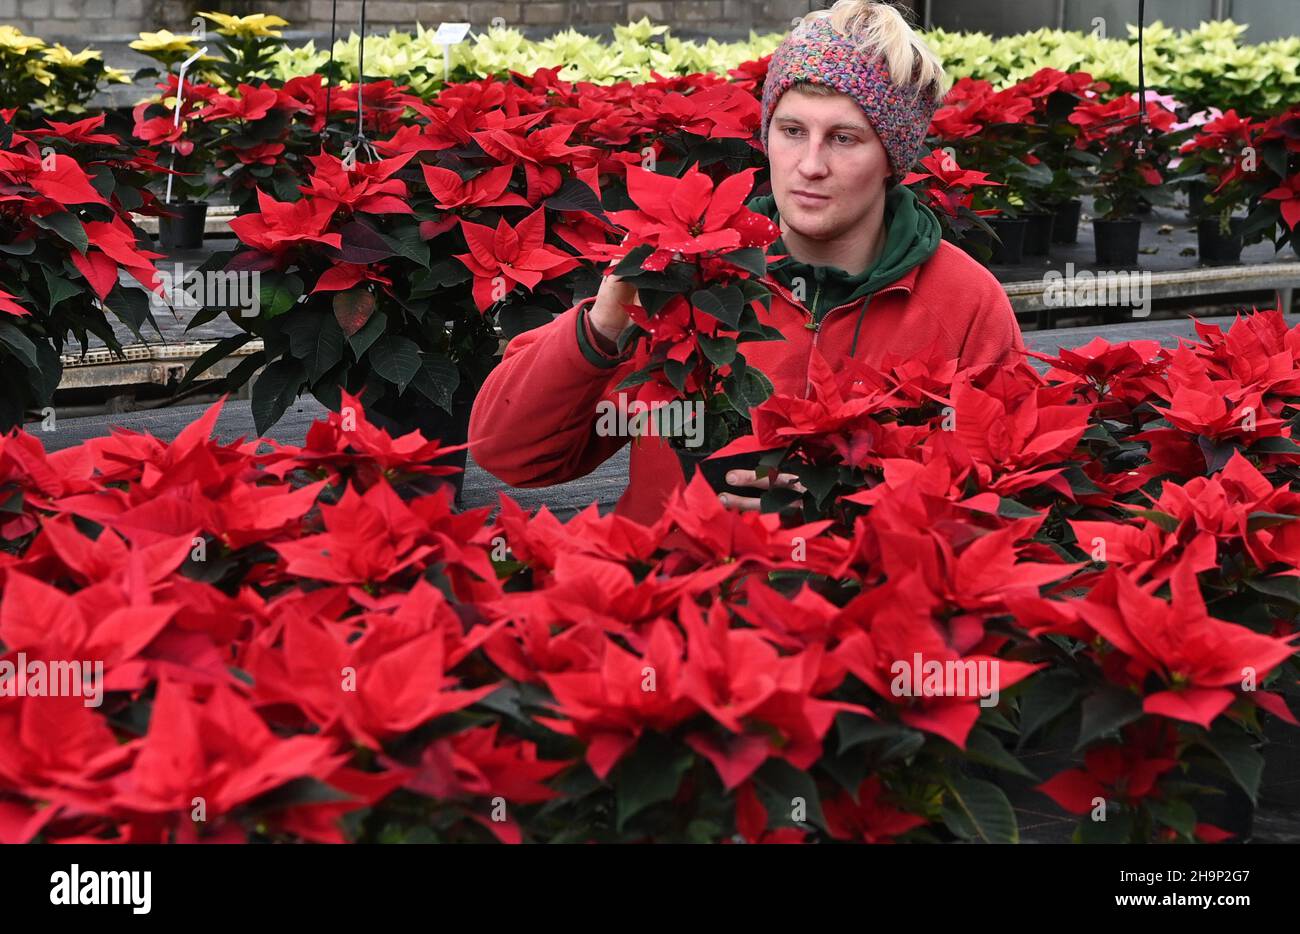 07 December 2021, Brandenburg, Schöneiche: Gardener Markus Lehmann observes the growth of poinsettias in a greenhouse at the Flora-Land Arnold nursery, which are the best sellers here at Christmas time. The seasonal products are grown here in the nursery's own greenhouses, brought to flower and sold on site. Photo: Jens Kalaene/dpa-Zentralbild/ZB Stock Photo